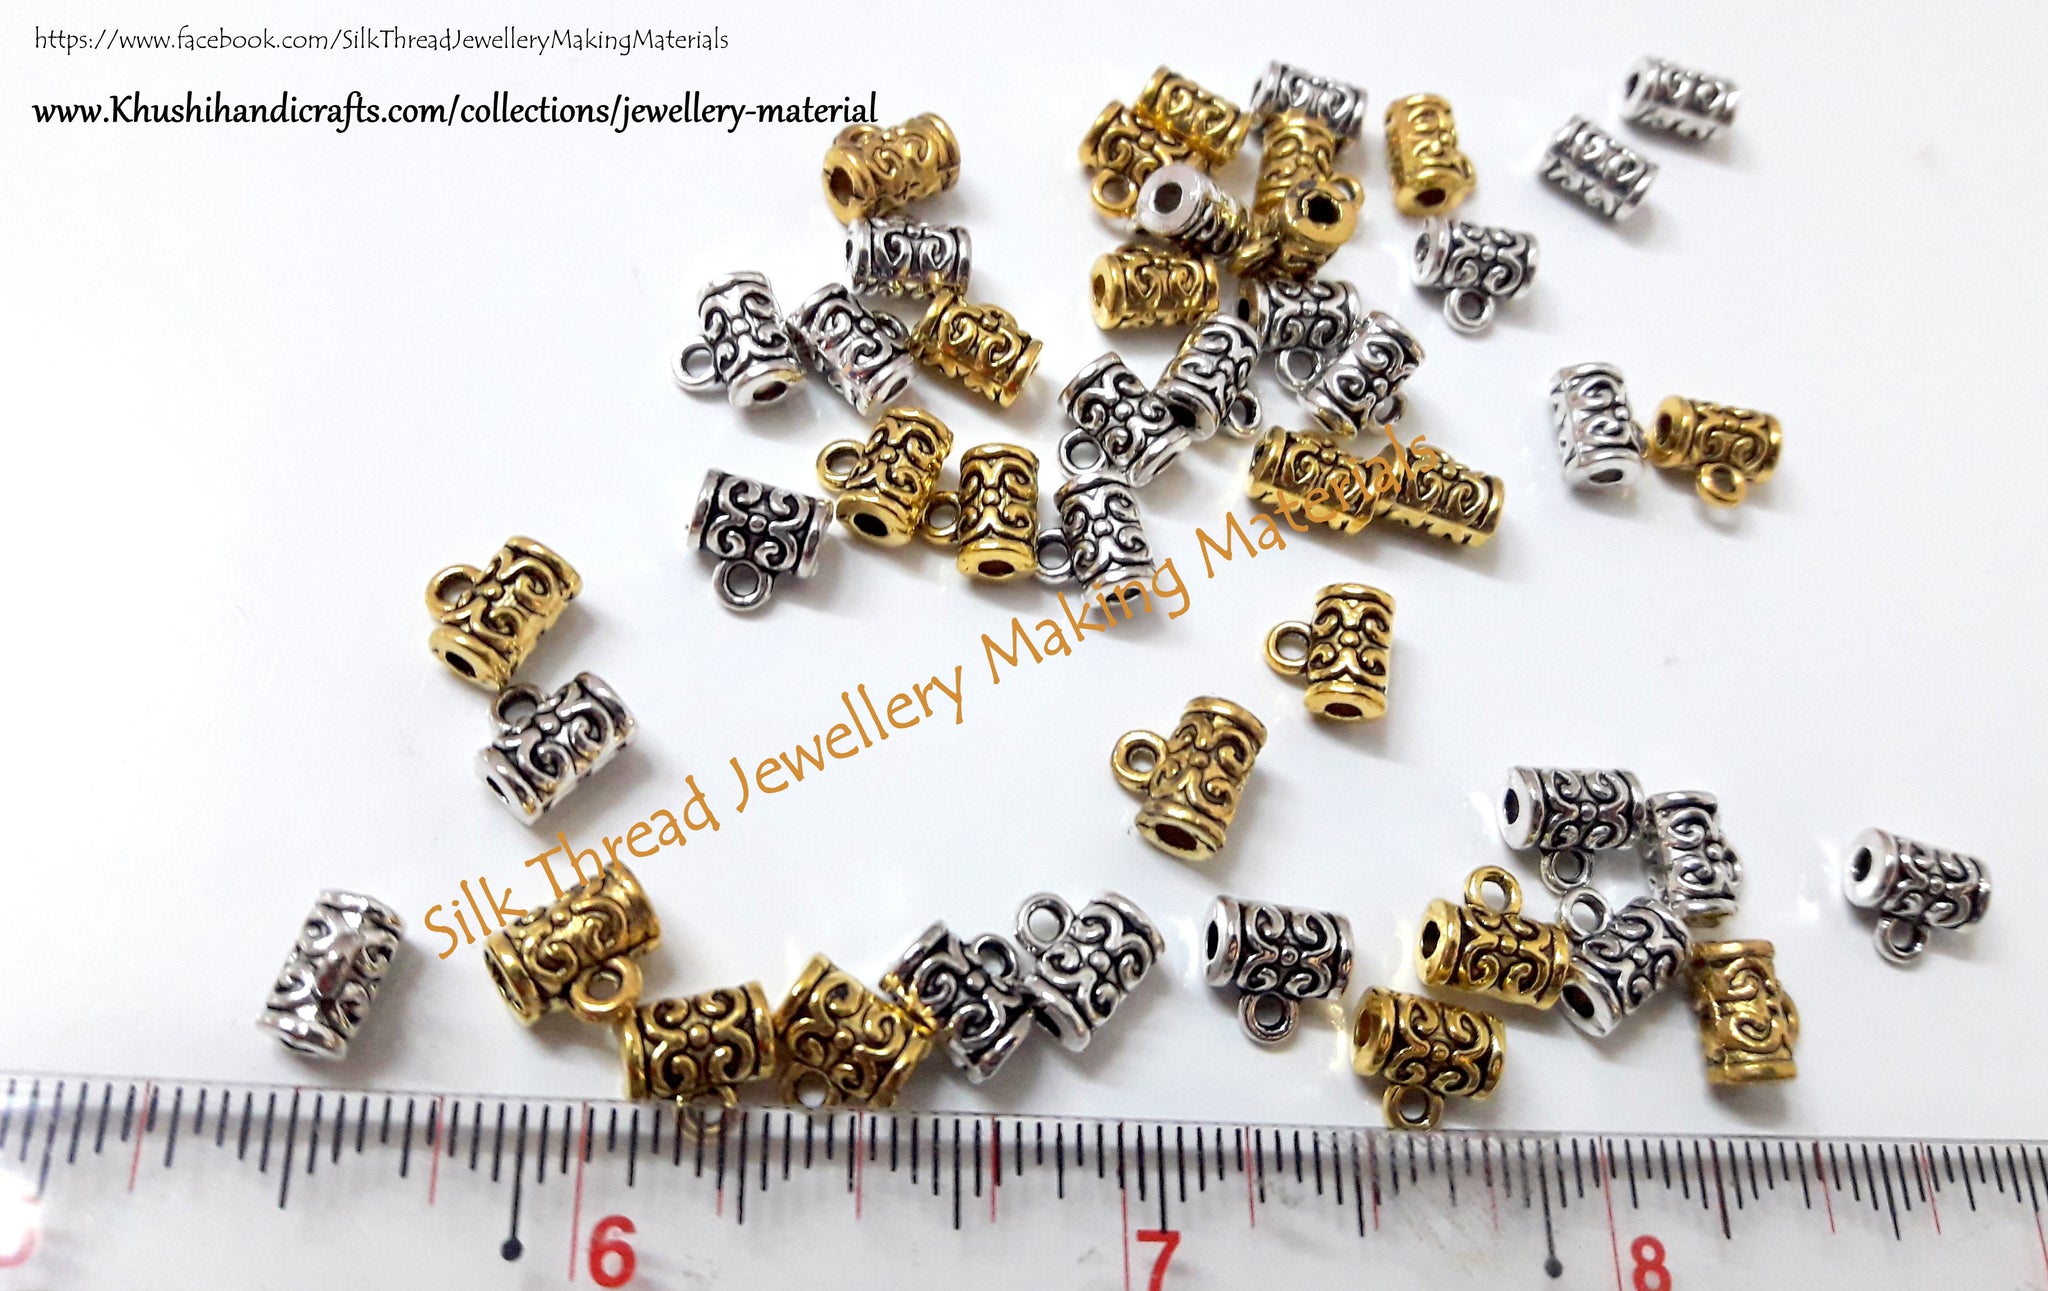 Antique Gold/Silver Designer Bails used for making Necklaces-Handmade Jewelry